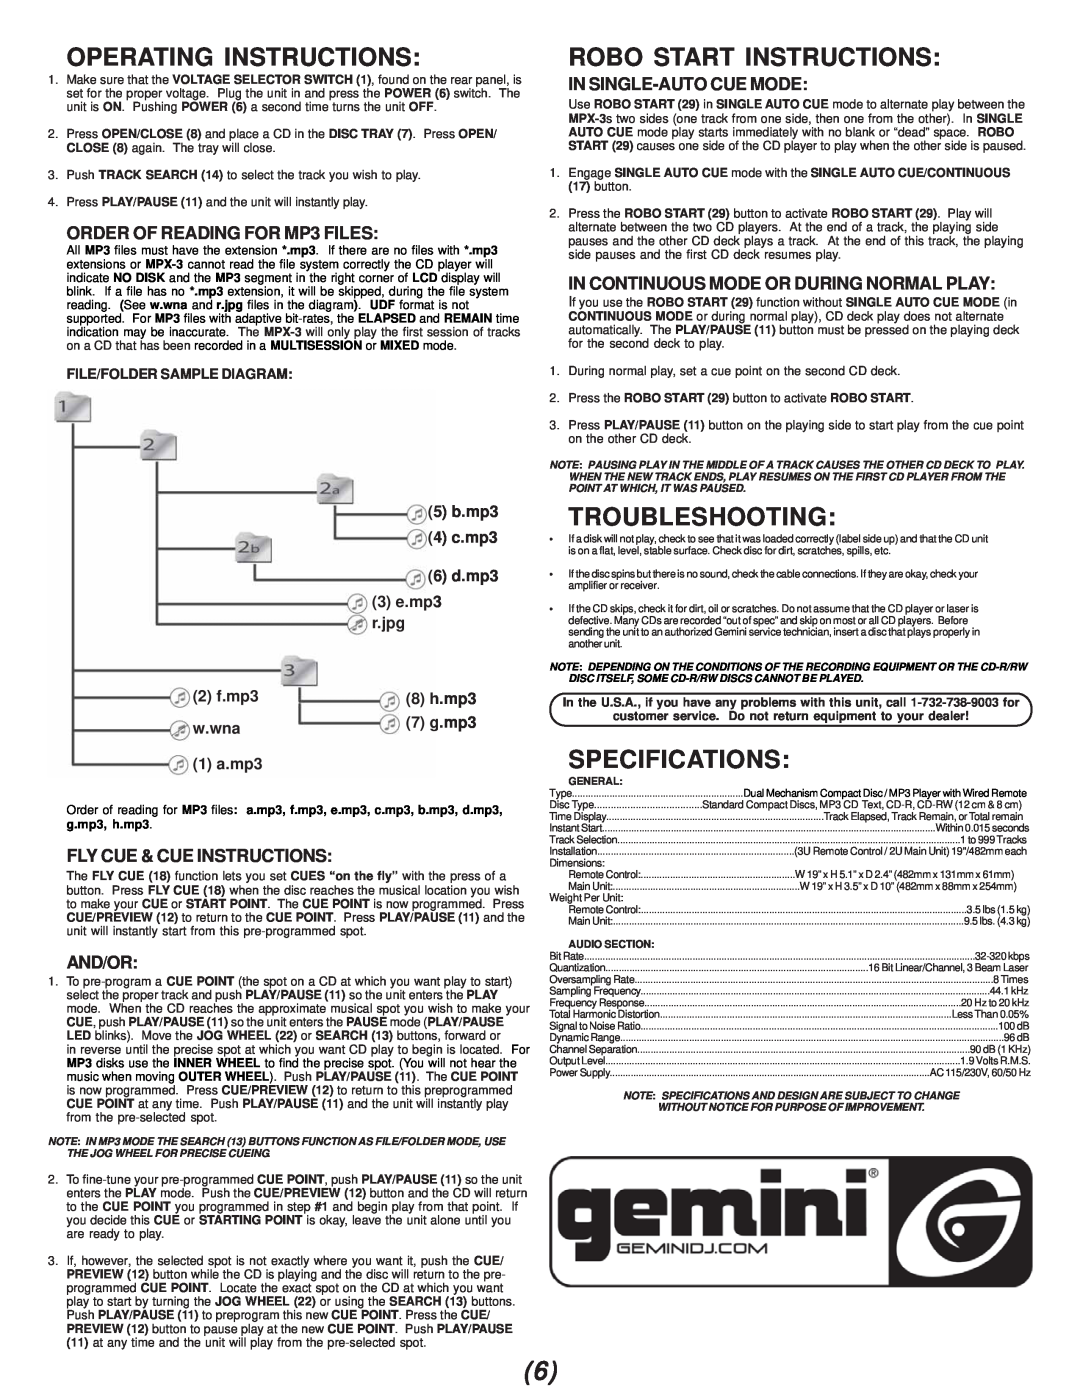 Gemini MPX-3 Operating Instructions, Robo Start Instructions, Troubleshooting, Specifications, 5 b.mp3 4 c.mp3 6 d.mp3 